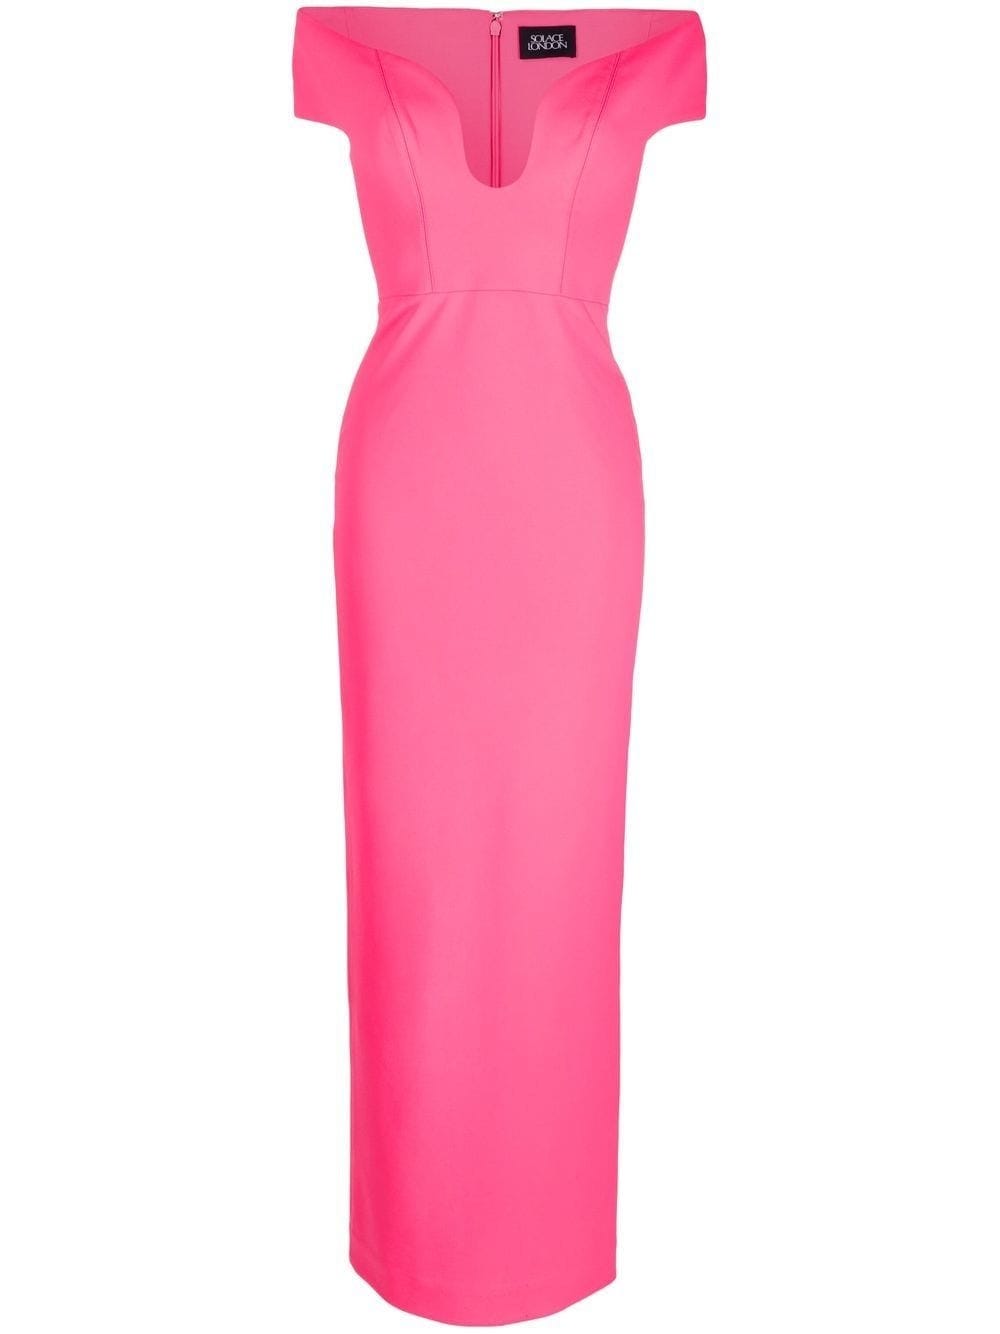 SOLACE LONDON MARLOWE PINK EVENING DRESS WITH OPEN SHOULDERS